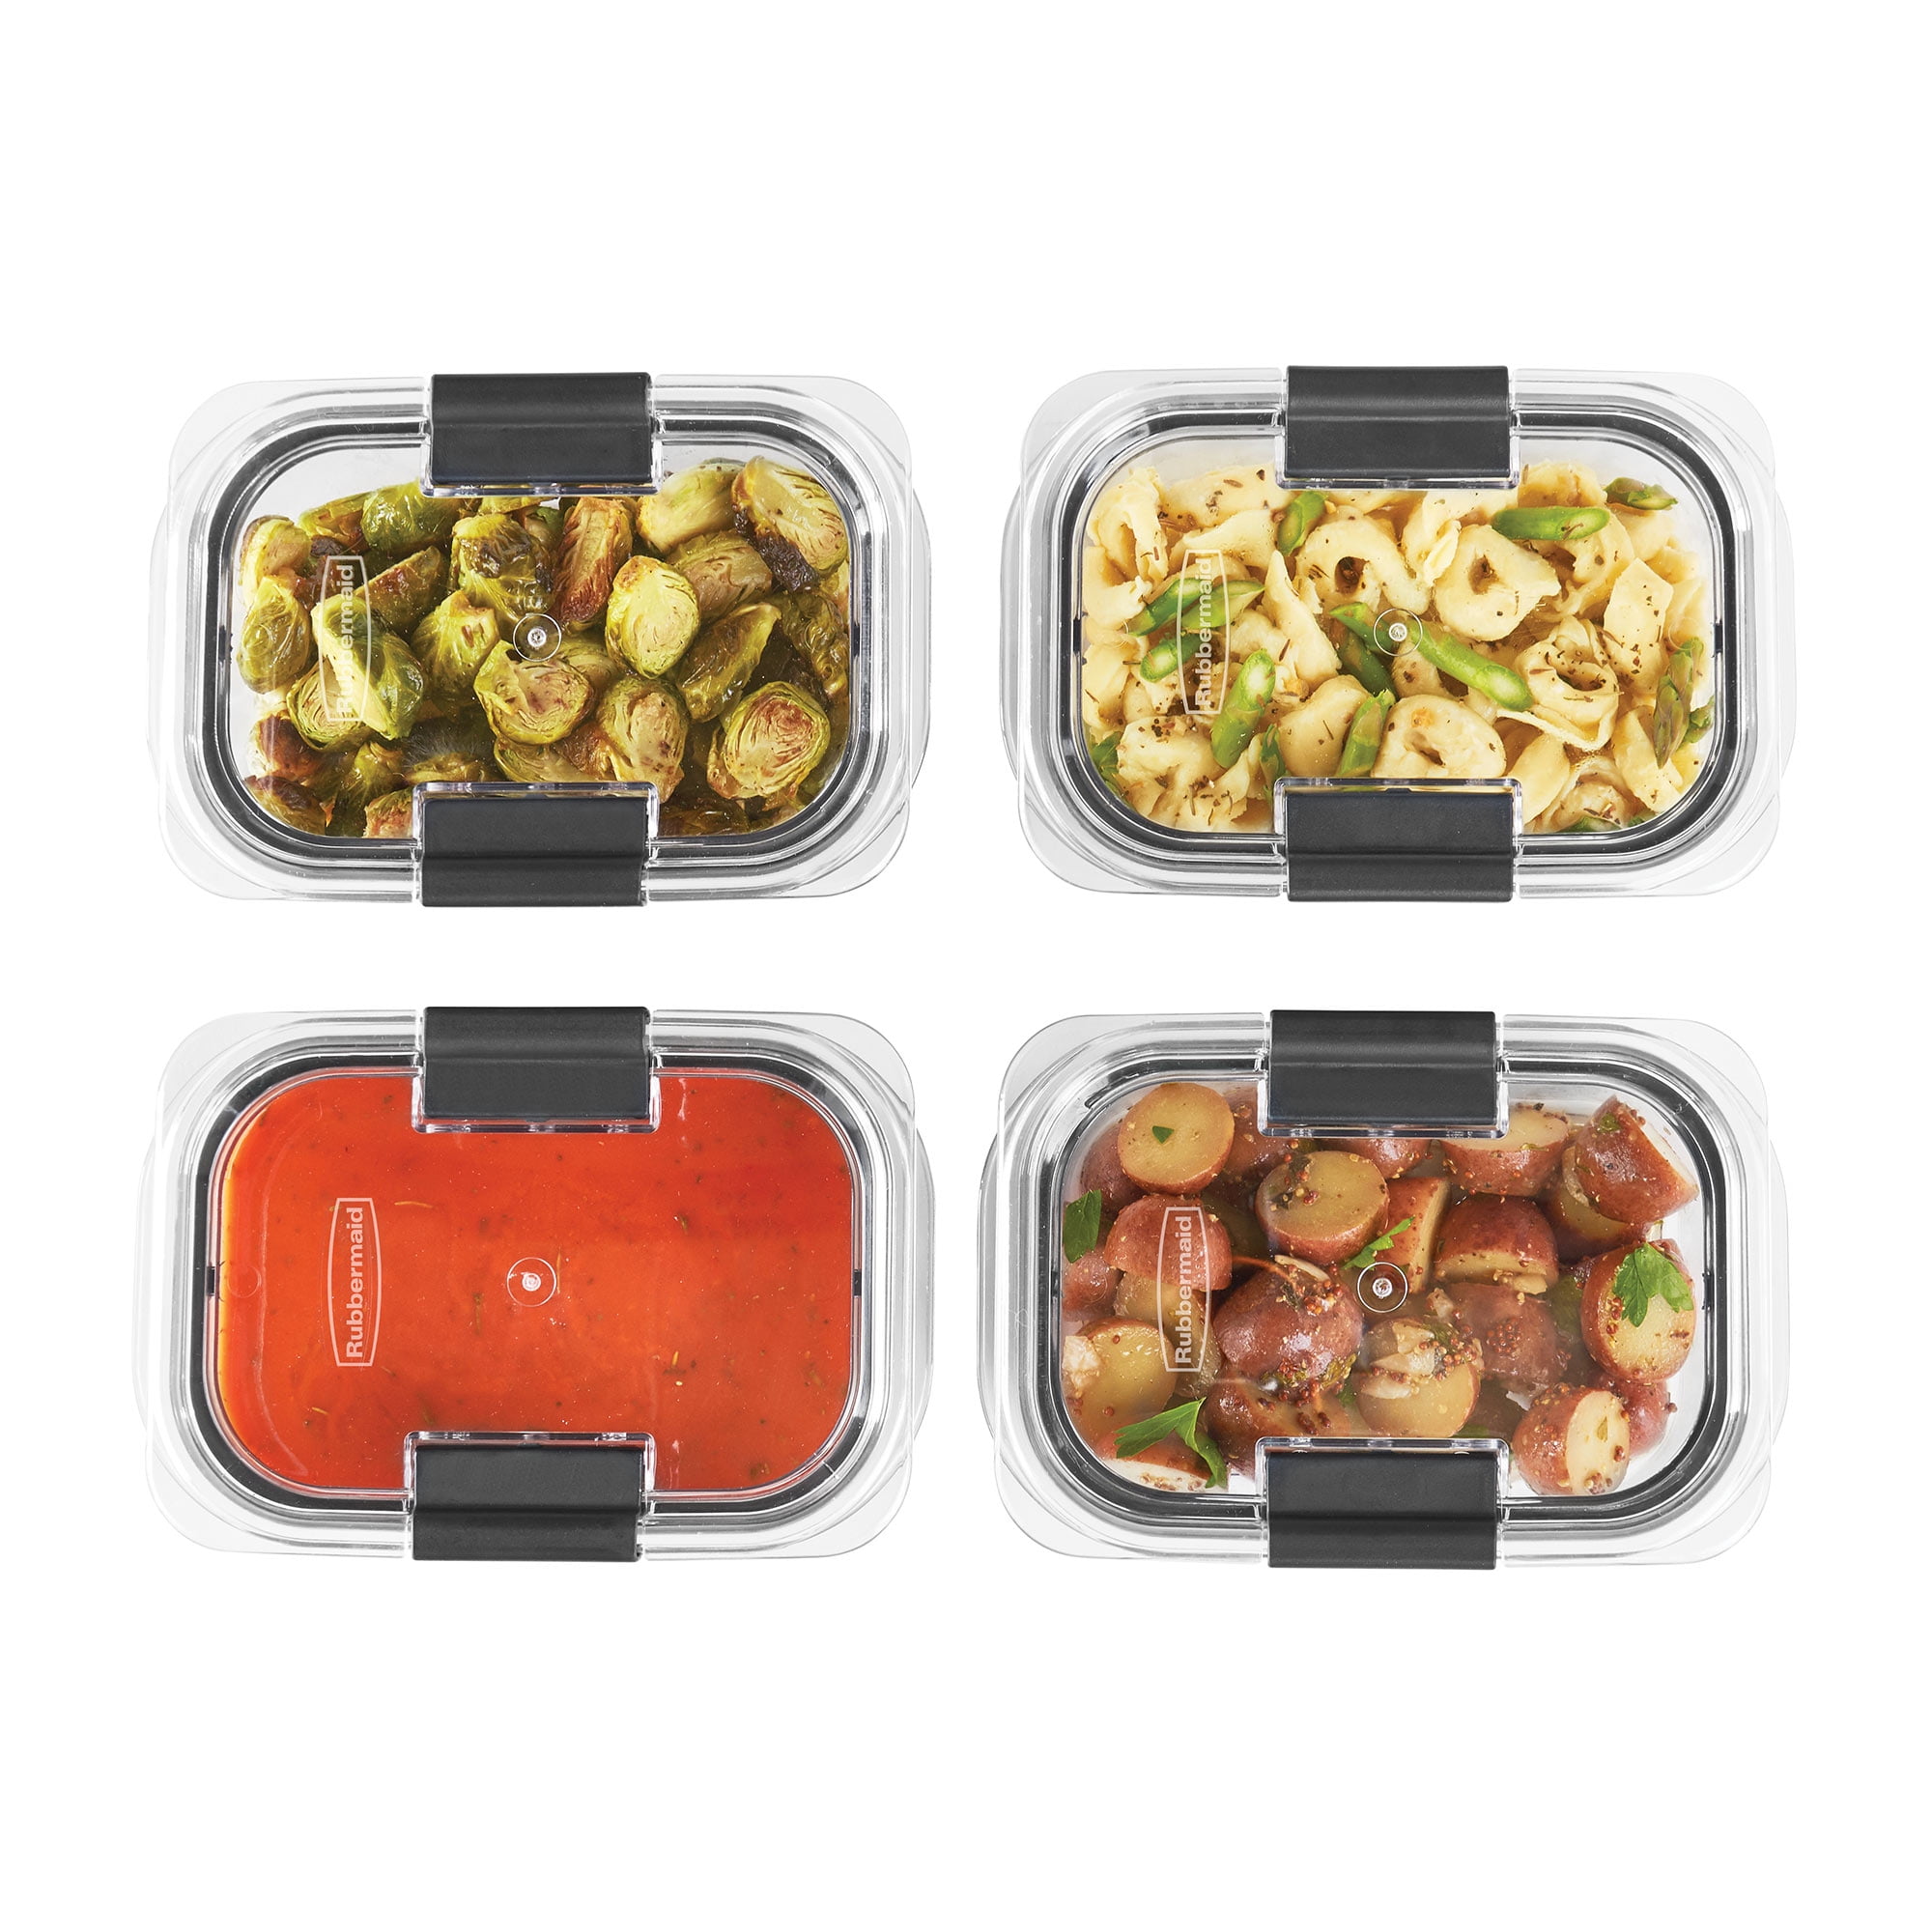 Rubbermaid Brilliance 4.7-Cup Food Storage Container - The WiC Project -  Faith, Product Reviews, Recipes, Giveaways